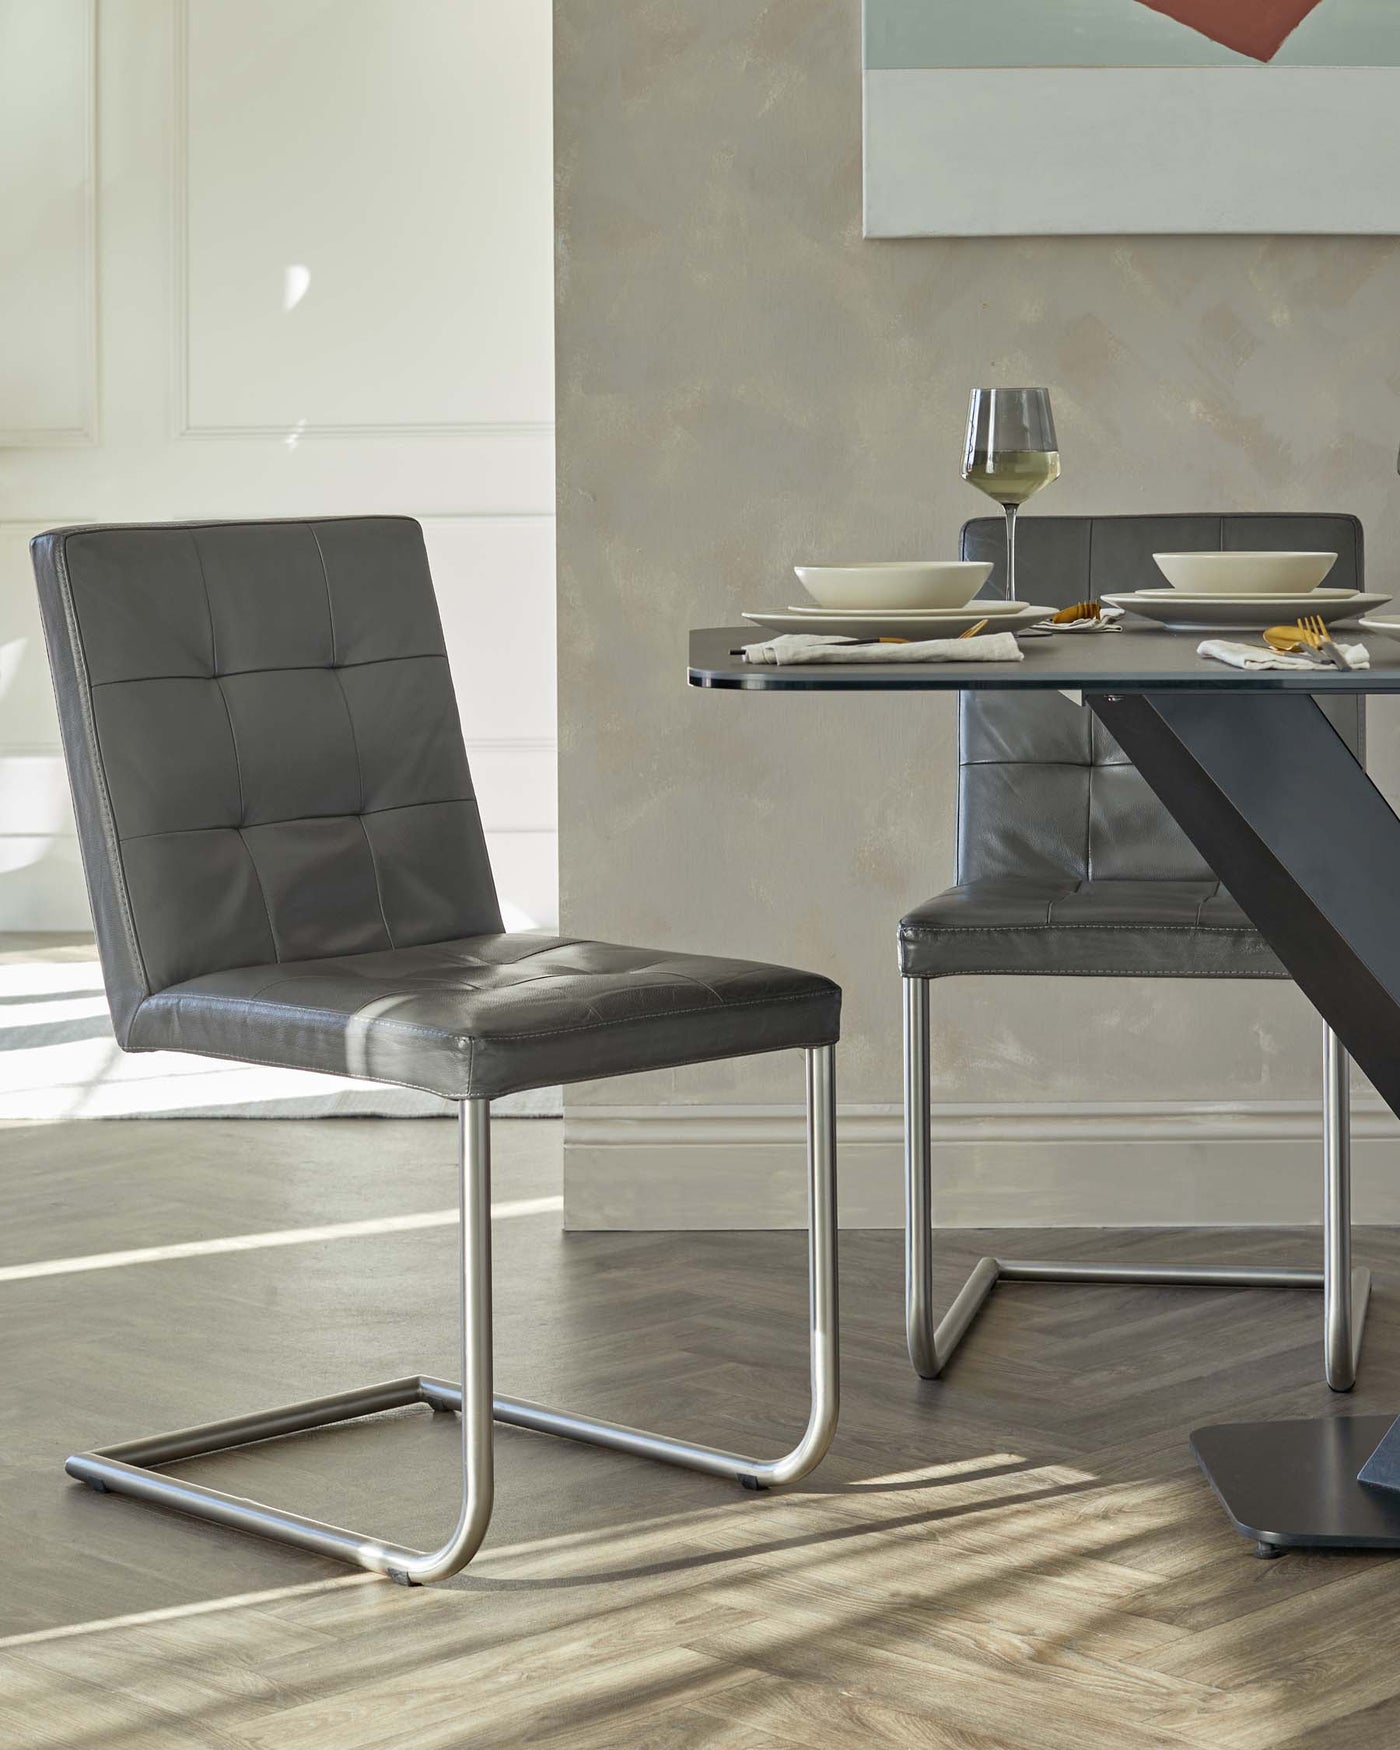 Modern dining room set featuring a cantilevered, stainless steel-framed chair with black upholstered seating, and a complementary black tabletop dining table with an angular, minimalist metal base. The table is set with simple white dishes, silver cutlery, and a wine glass.